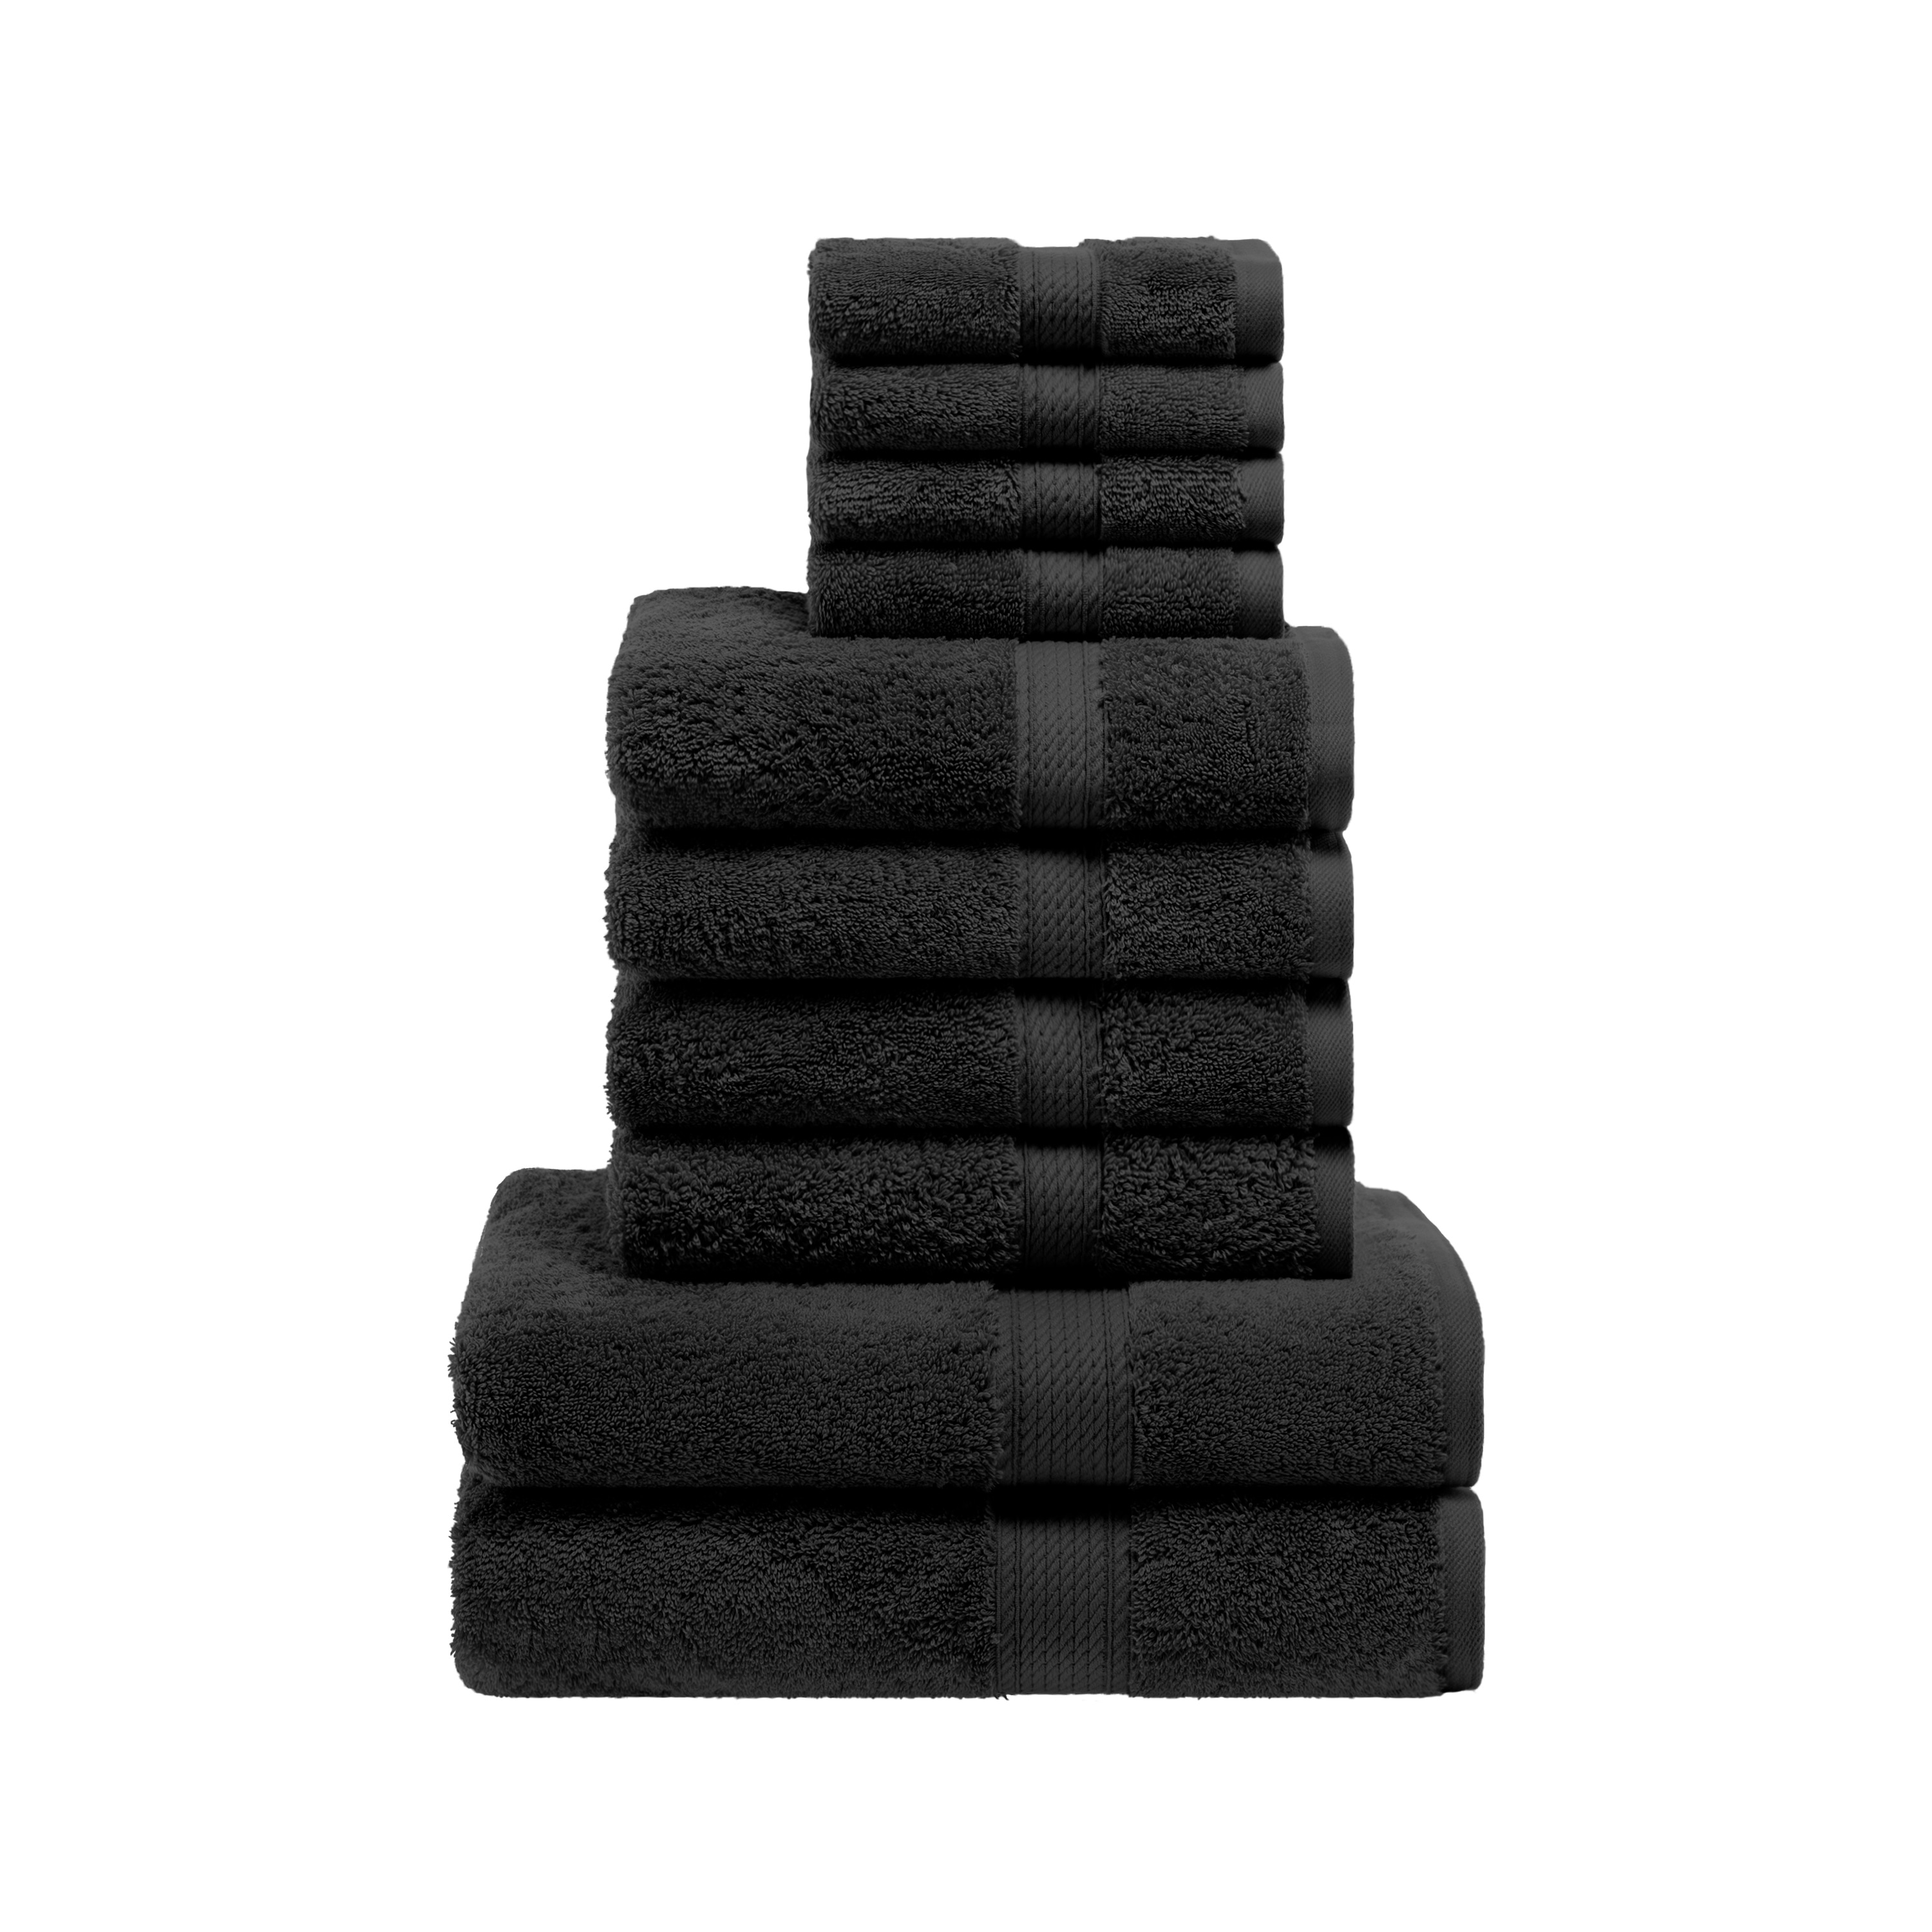 https://ak1.ostkcdn.com/images/products/is/images/direct/4febfbcb0acd9eb10455abbf7f5049bd122543cc/Egyptian-Cotton-Heavyweight-Solid-Plush-Towel-Set-by-Superior.jpg